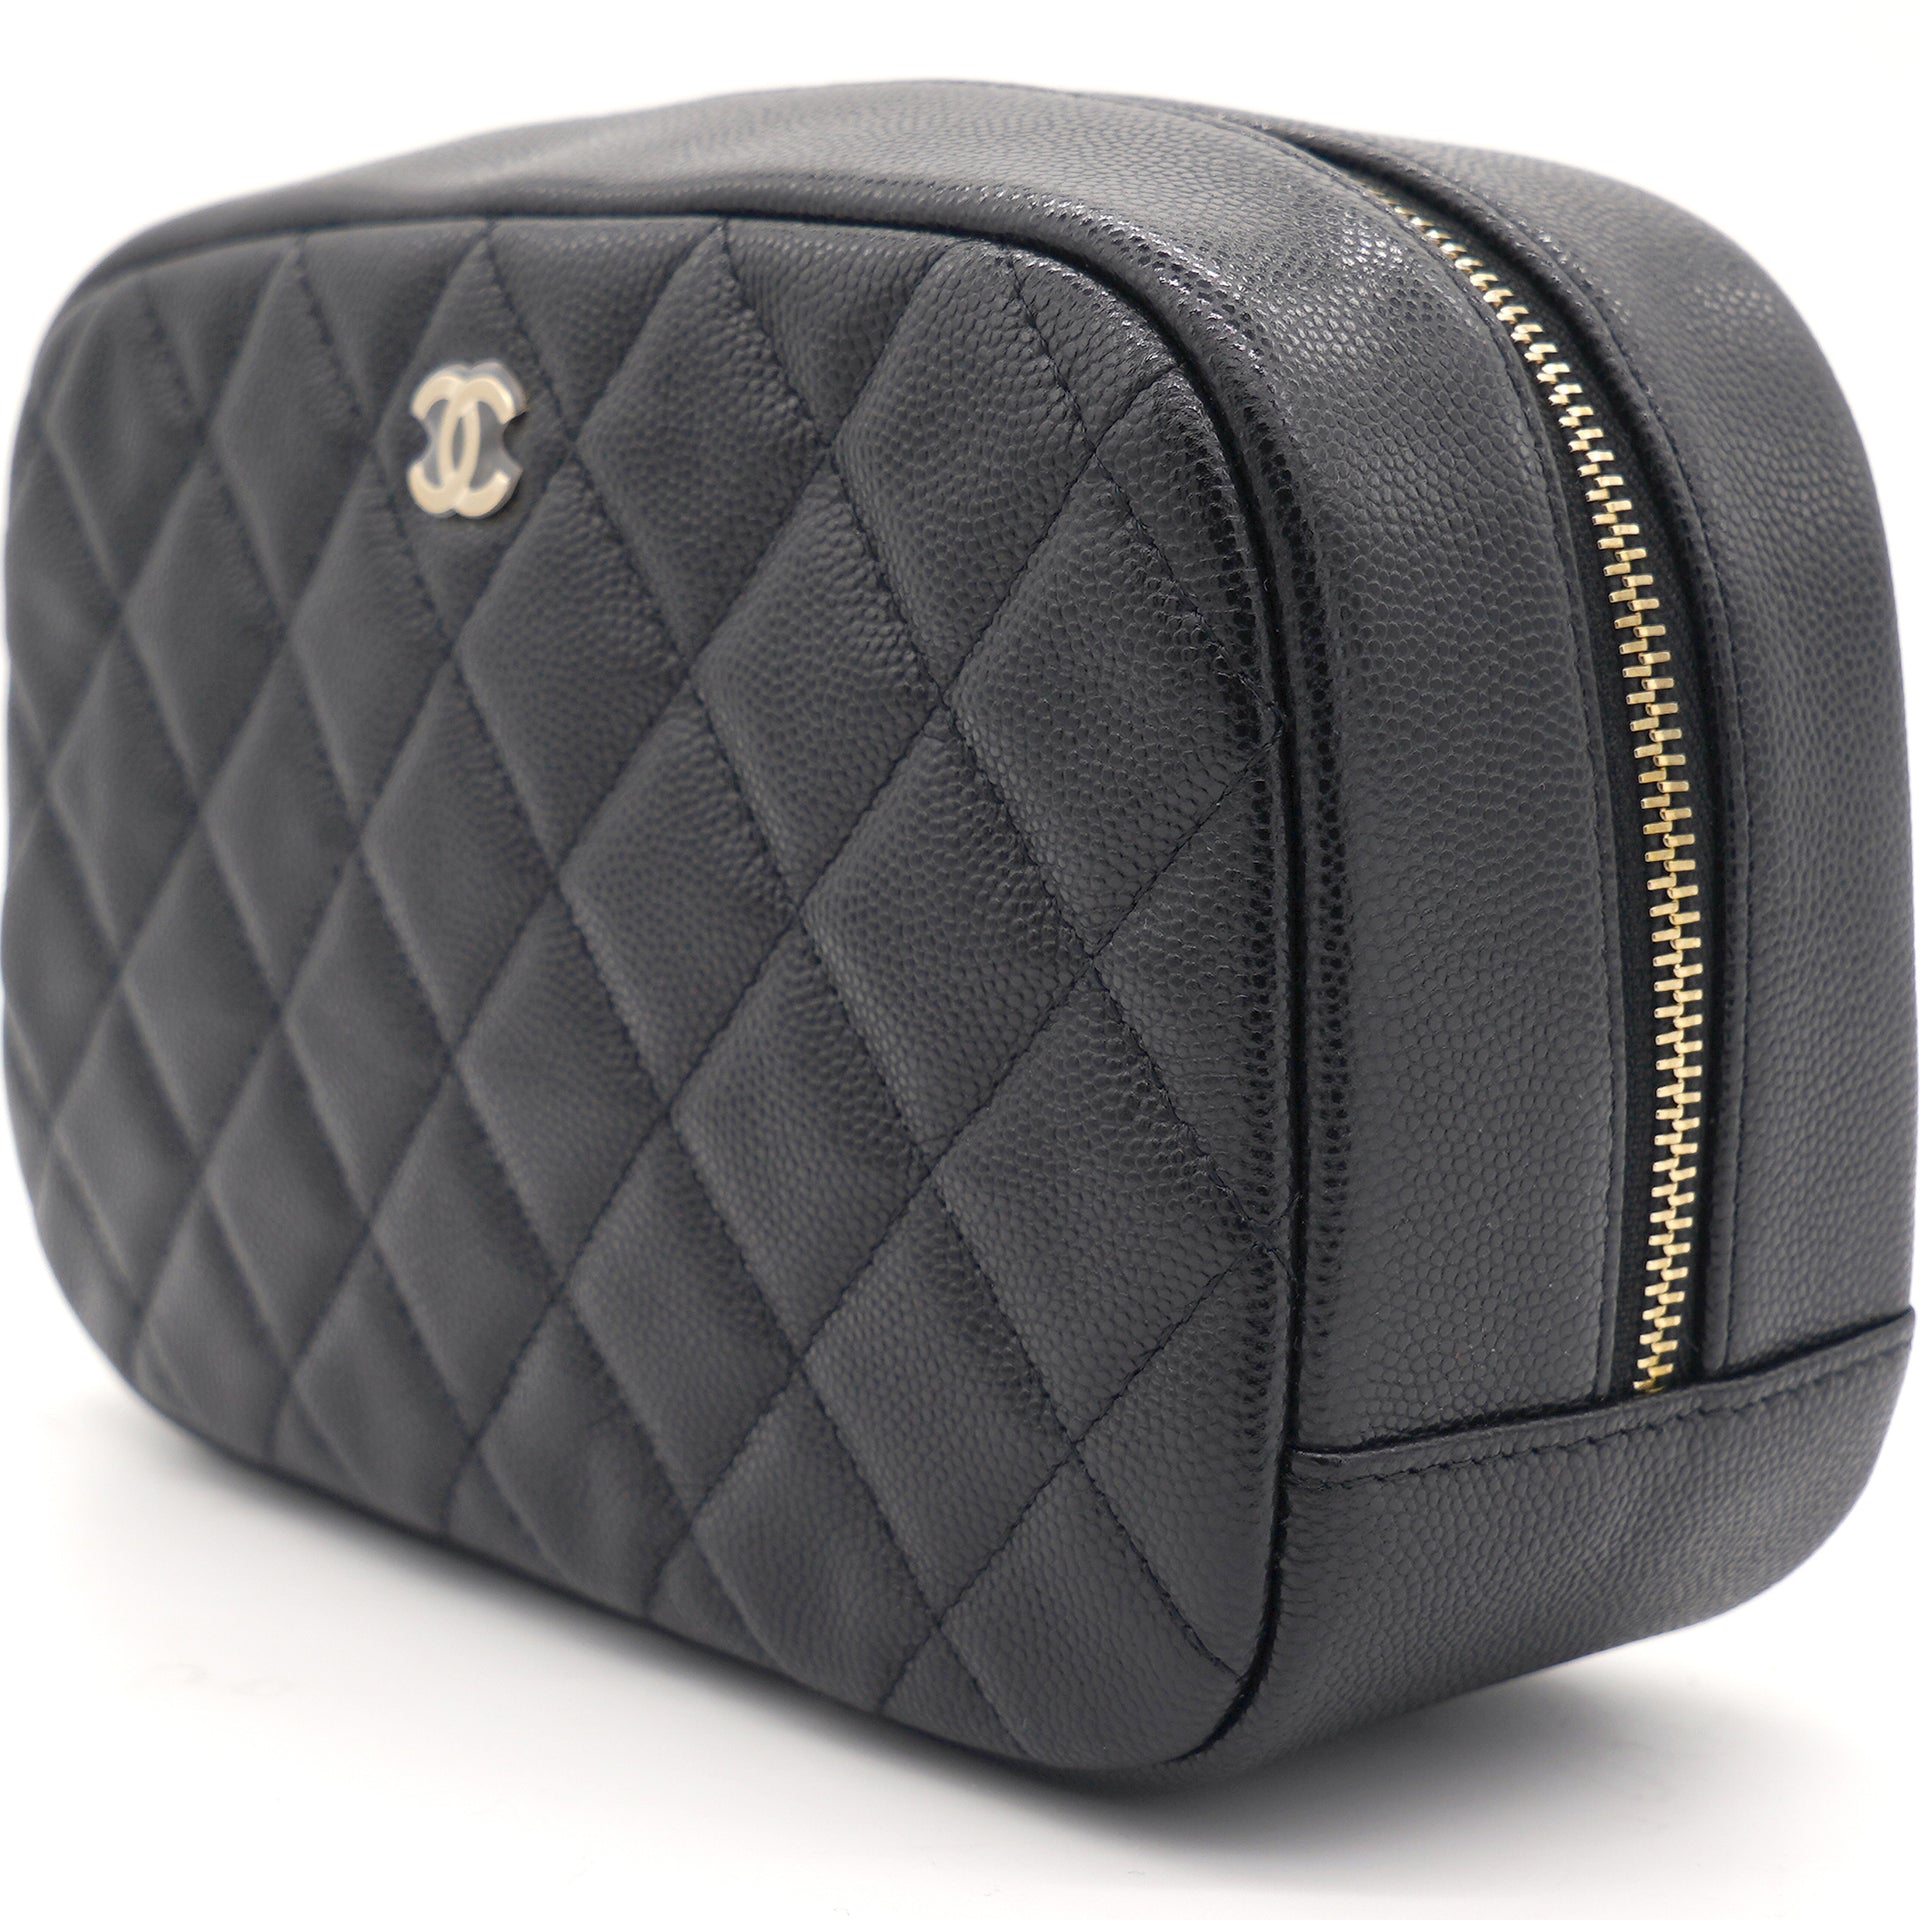 Caviar Quilted Curvy Pouch Cosmetic Case Black